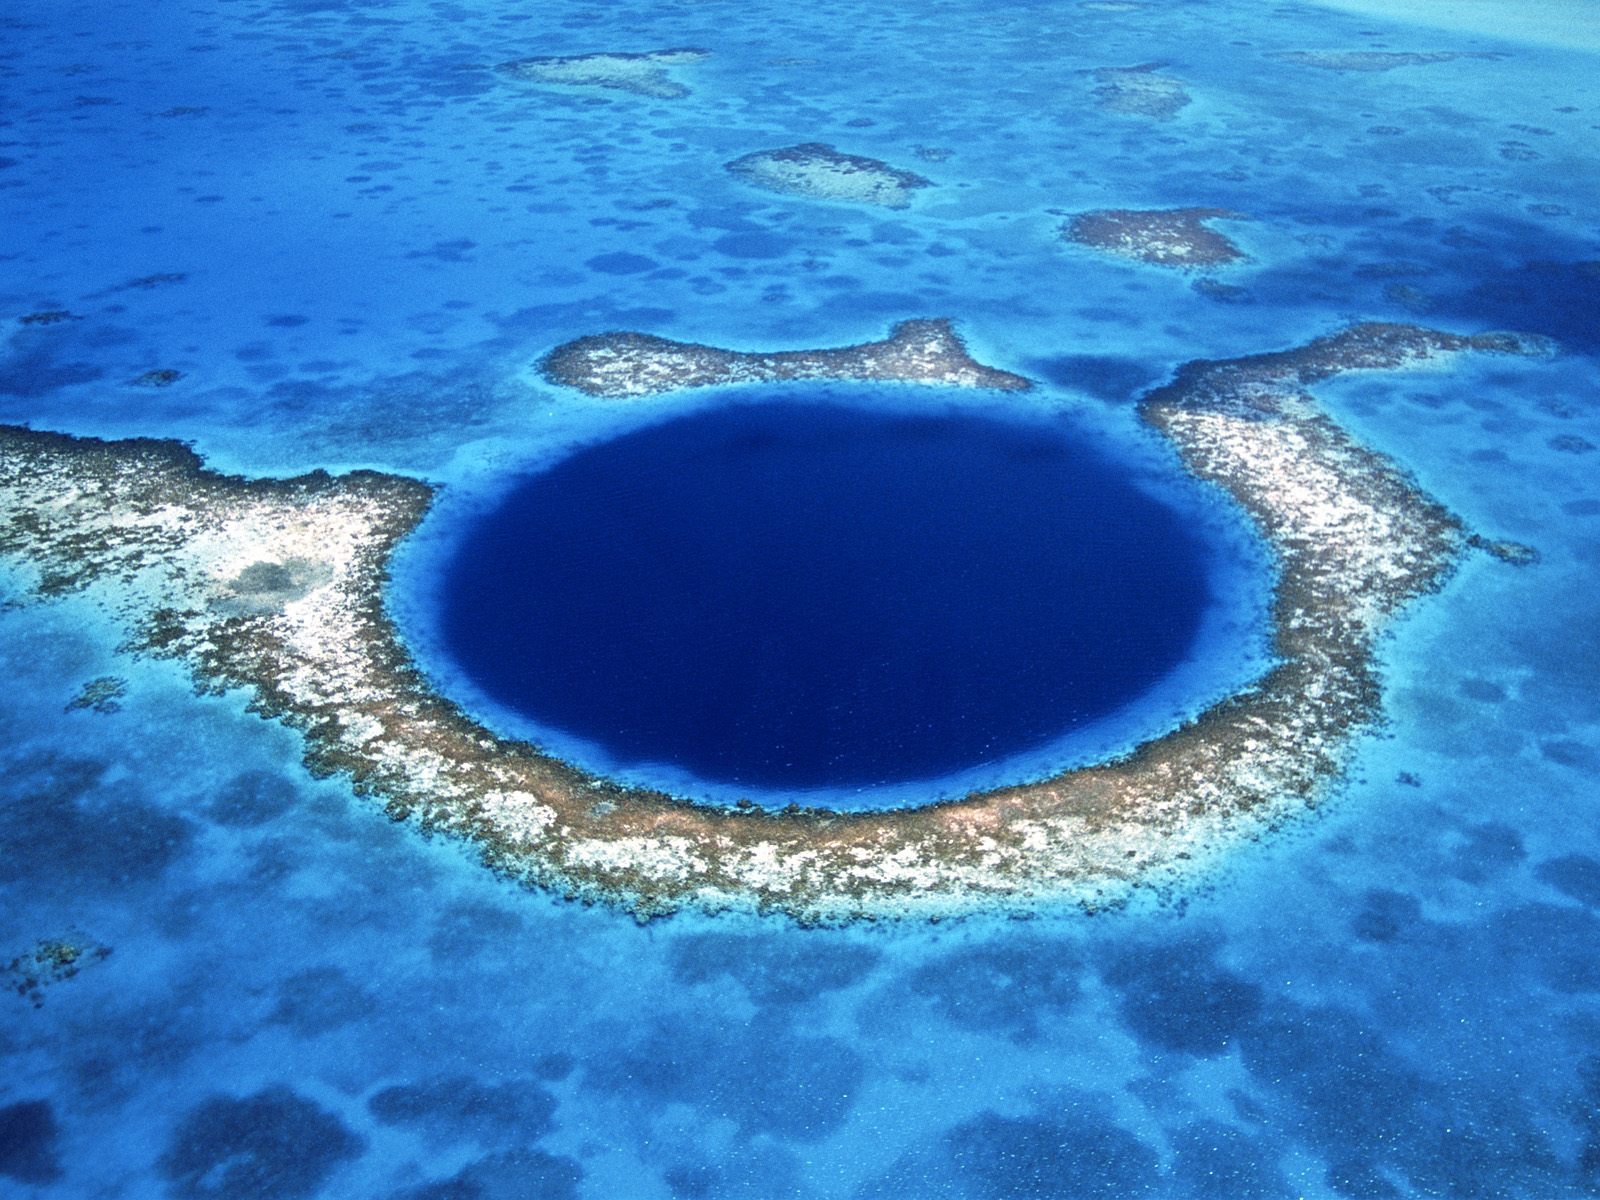 Wallpaper Abyss on Nature Abyss Blue Hole Hd Wallpaper Color Palette Tags Nature Abyss